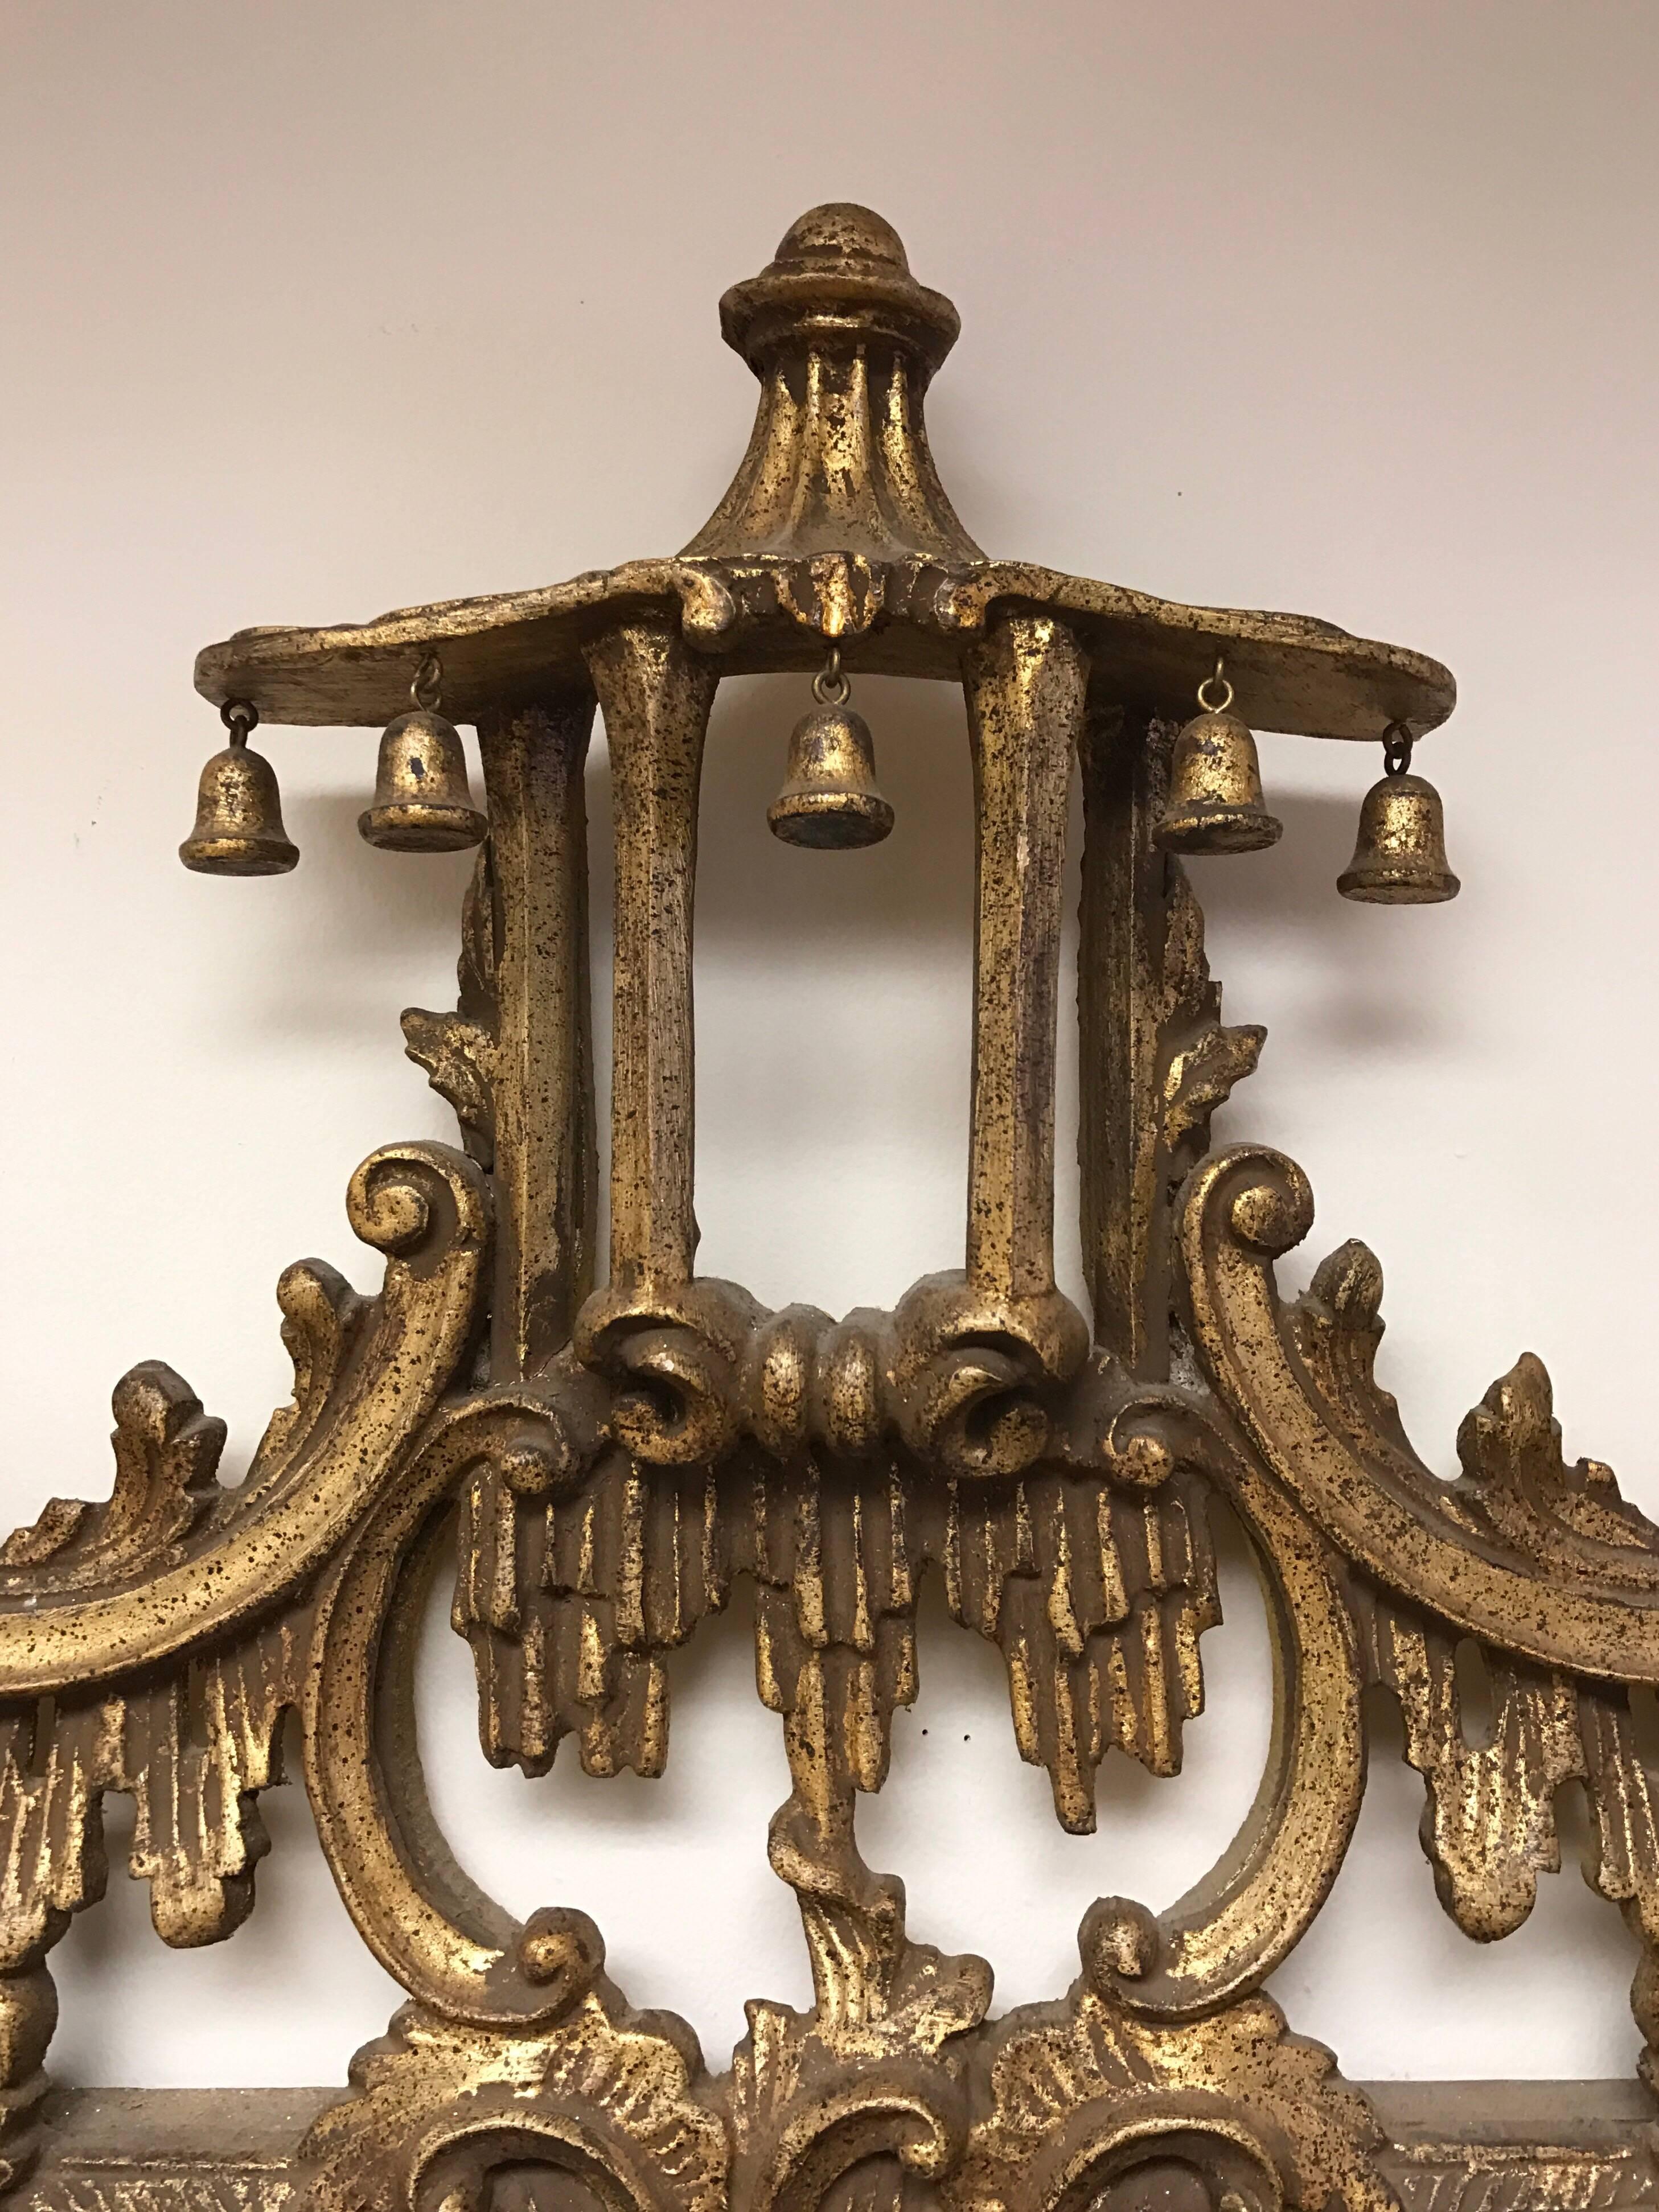 Original intricately carved chinoiserie pagoda mirror with gilt wood. Features carved foliate detail all around and hanging bells below the top of the pagoda steeple. Vintage Chinese Chippendale at its very best. Made in Italy.